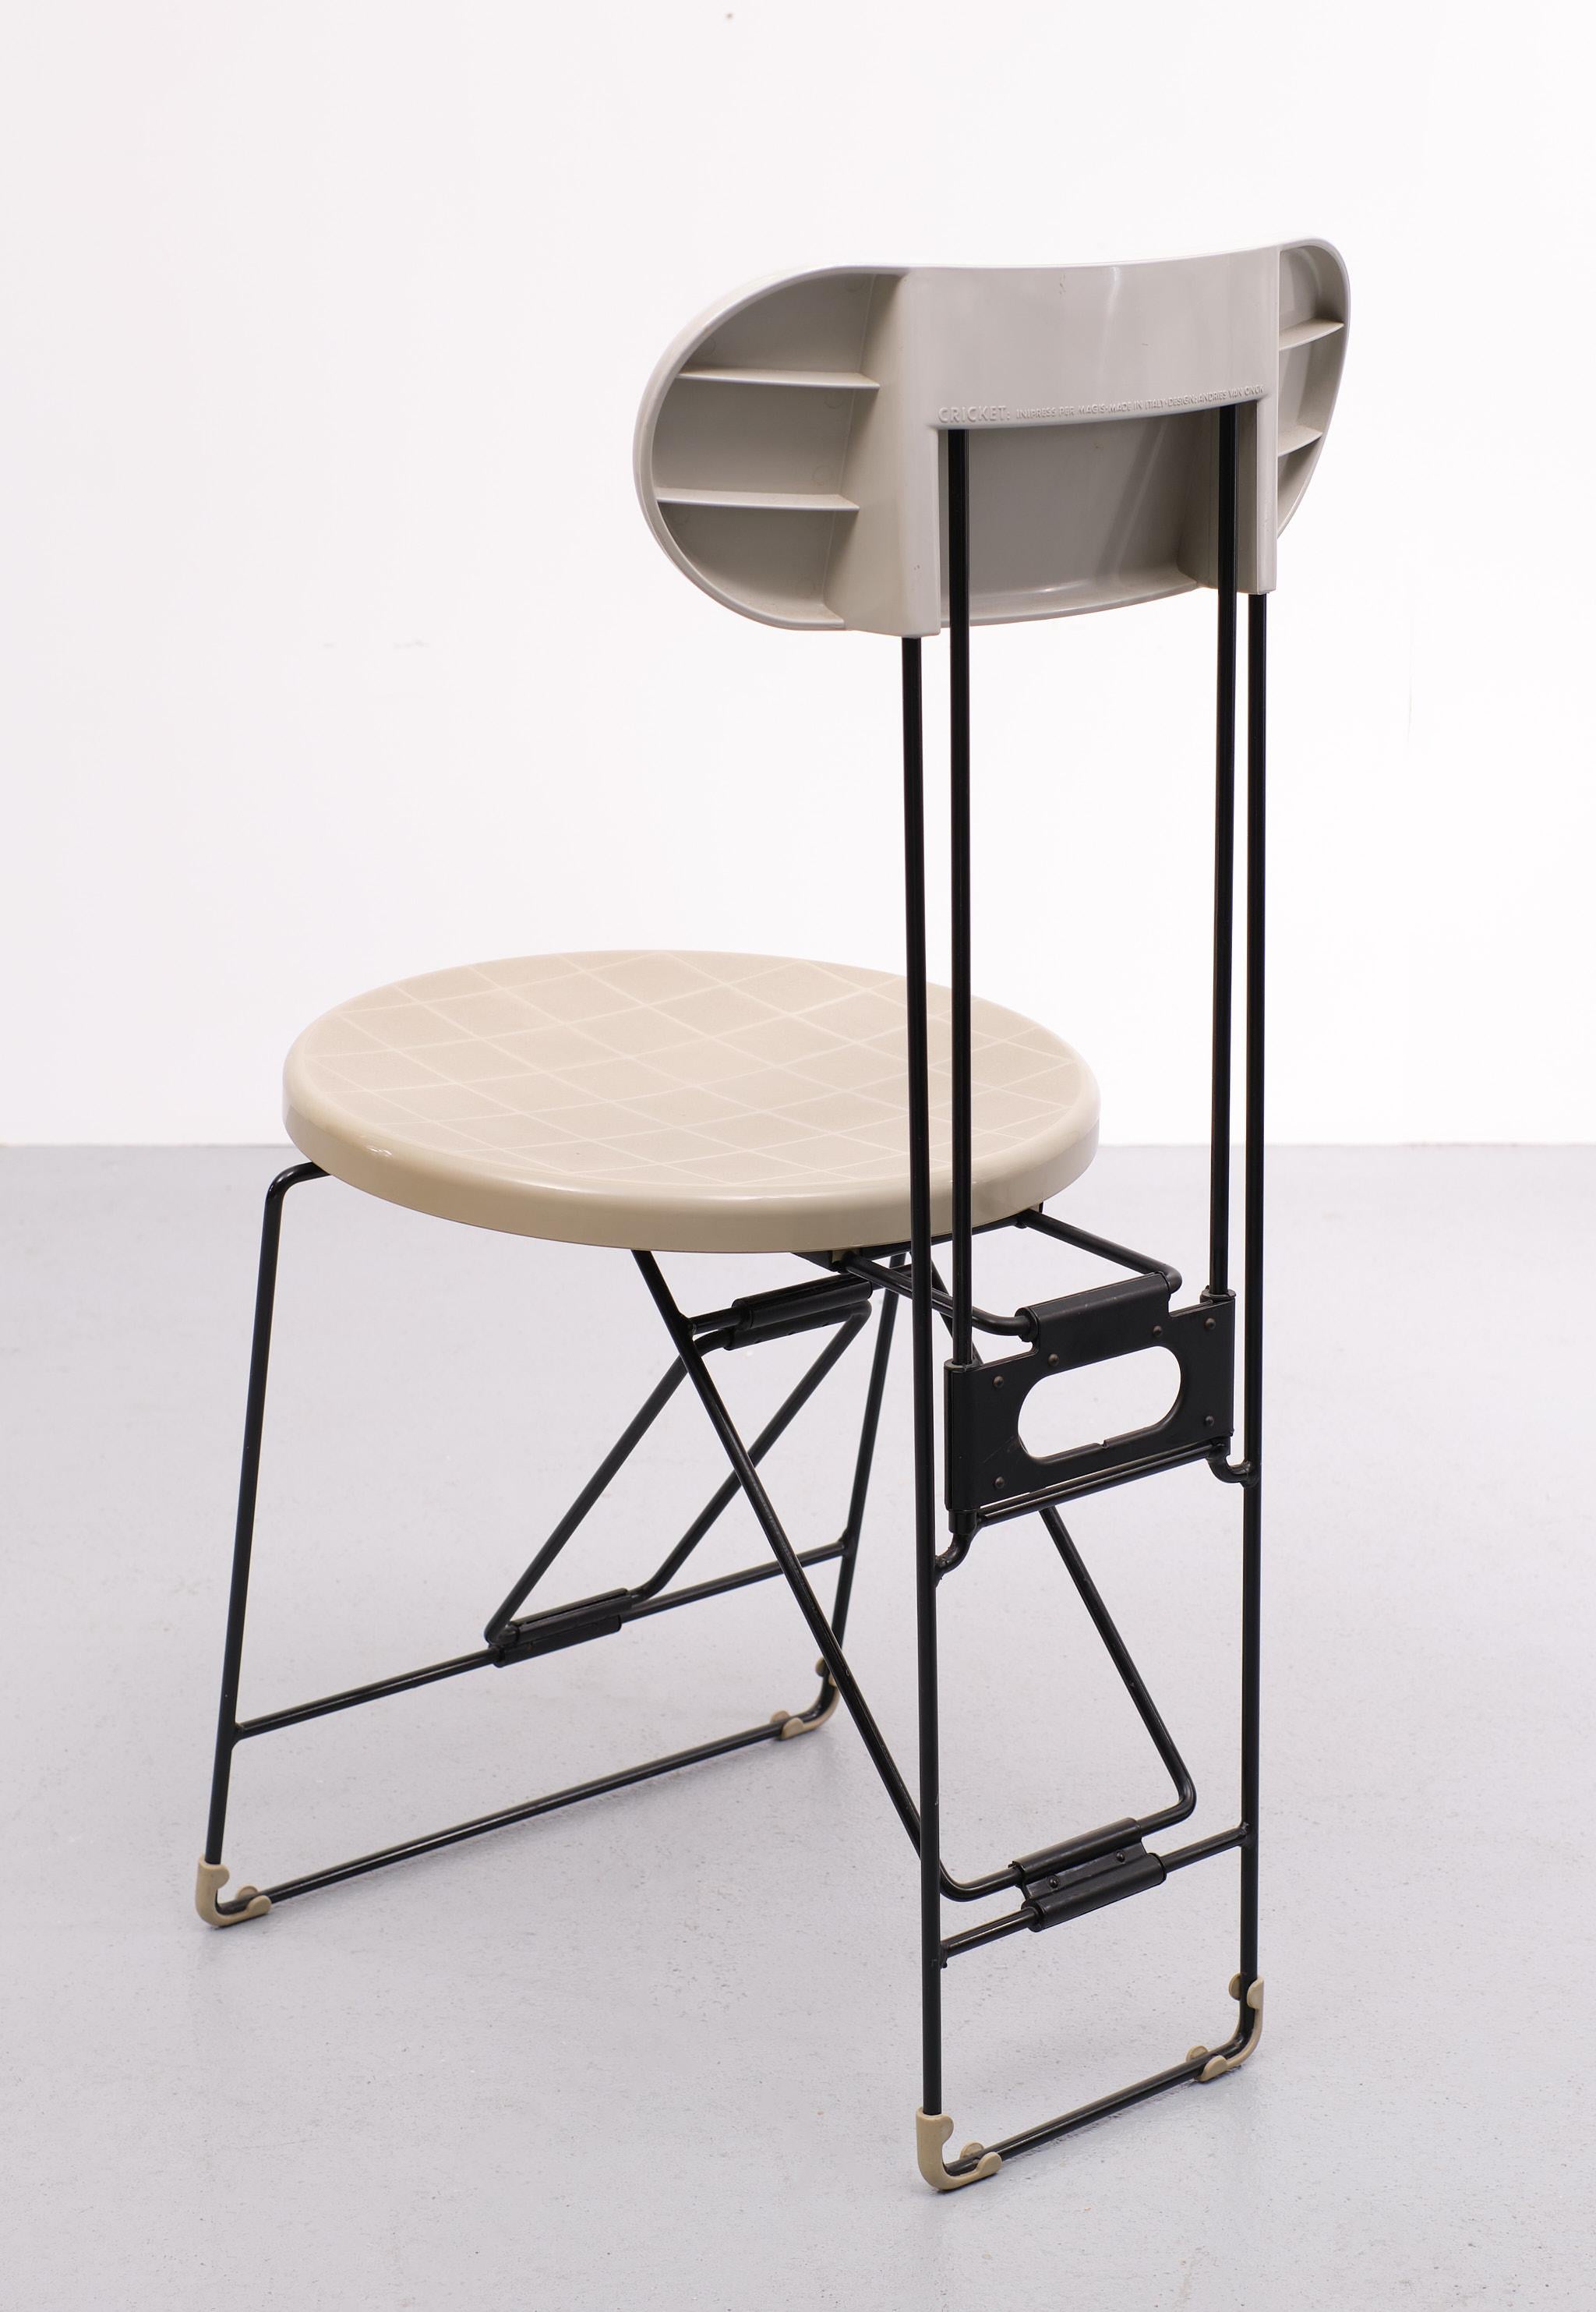 Andries Van Onck Post Modern Folding Chair, 1984 In Good Condition For Sale In Den Haag, NL